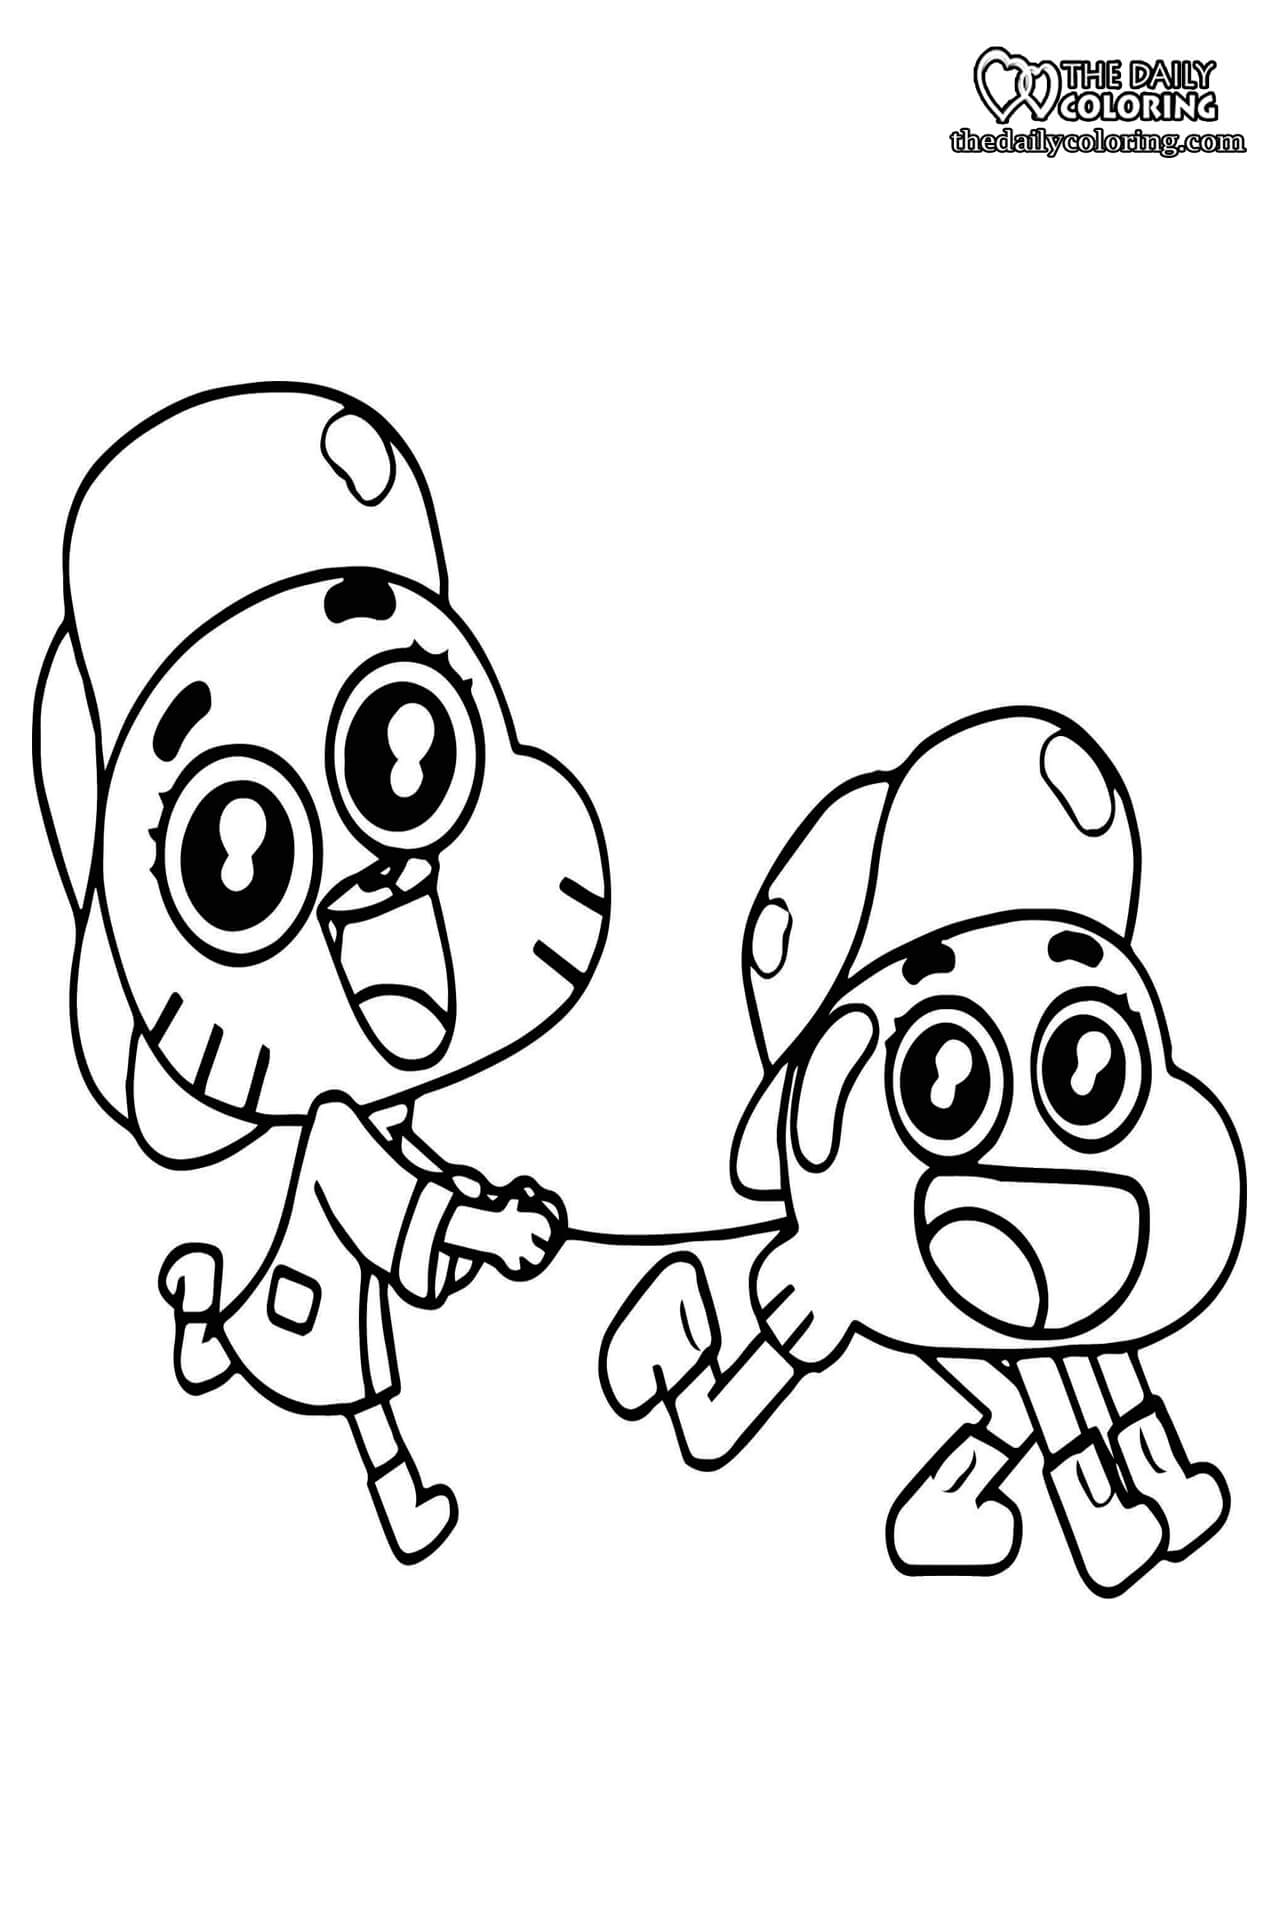 gumball-coloring-page